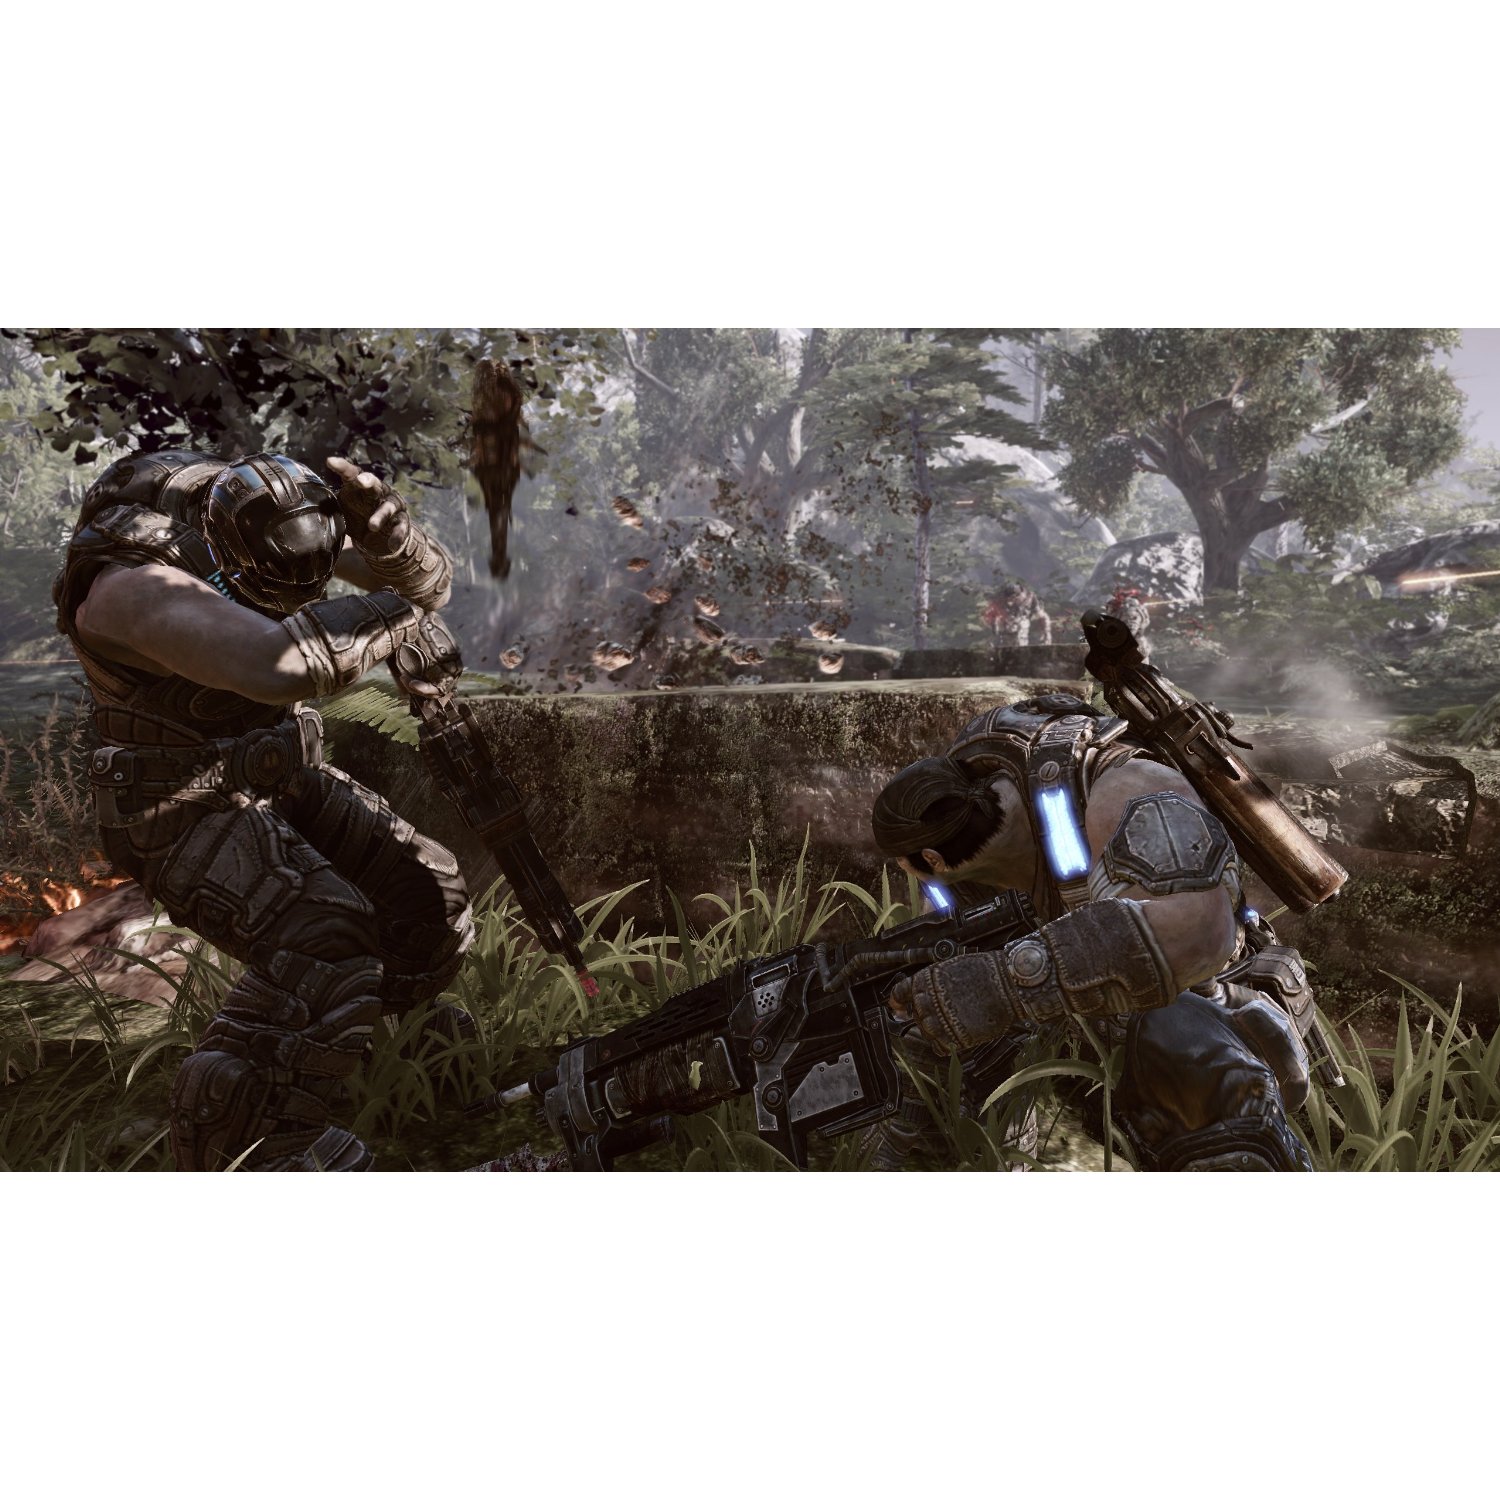 http://thetechjournal.com/wp-content/uploads/images/1108/1312638793-gears-of-war-3-game-for-xbox-360-4.jpg